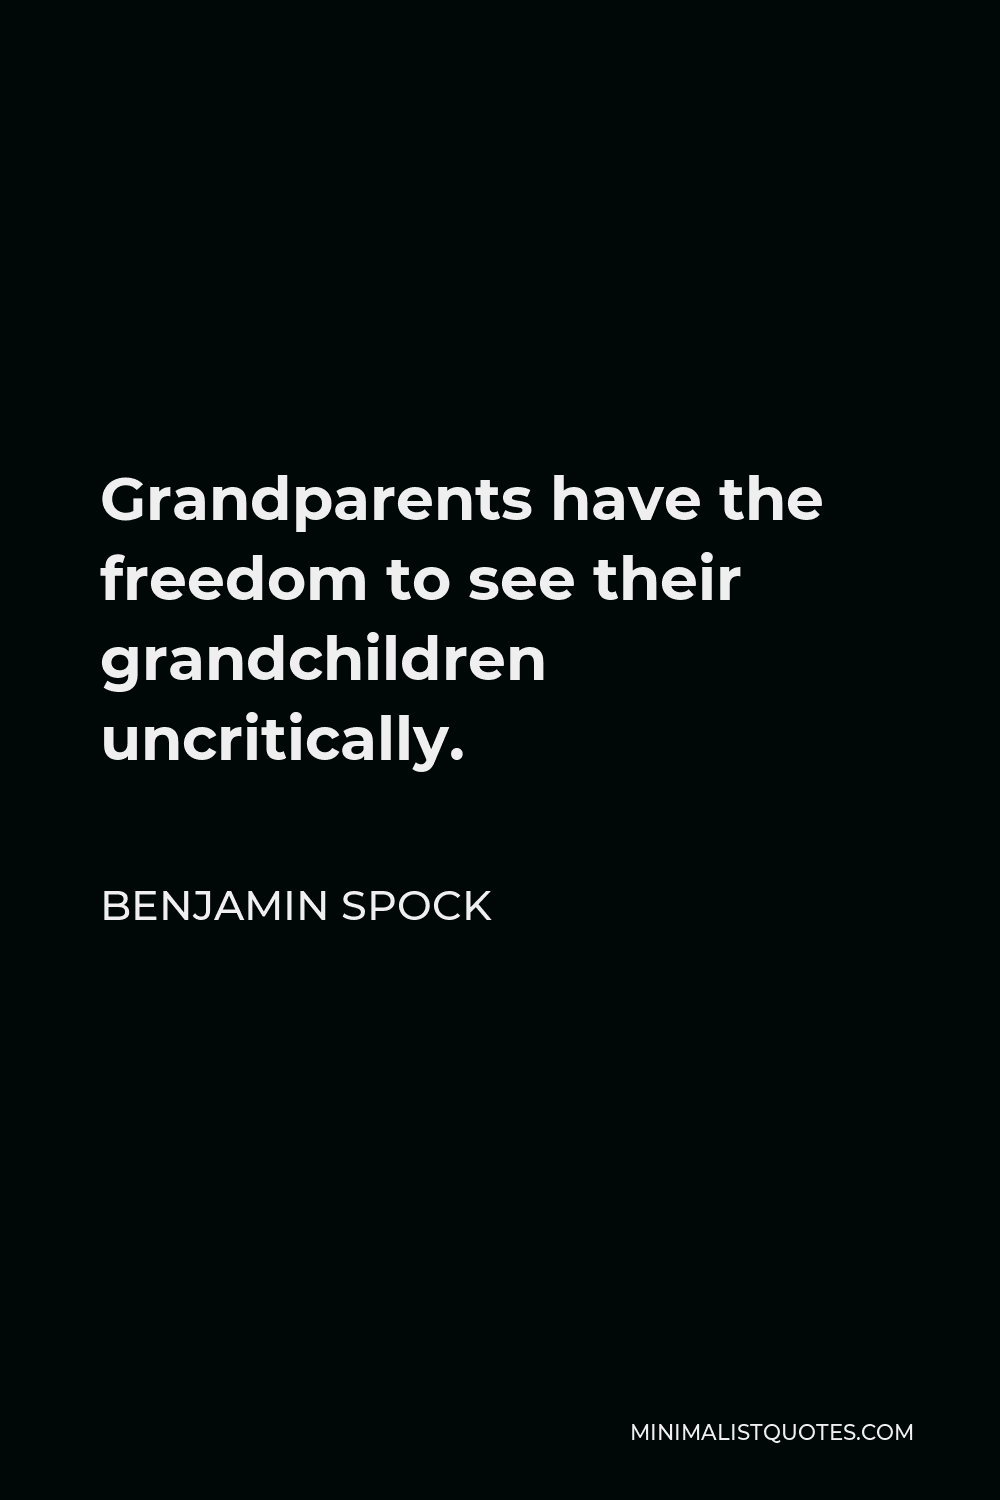 Benjamin Spock Quote - Grandparents have the freedom to see their grandchildren uncritically.